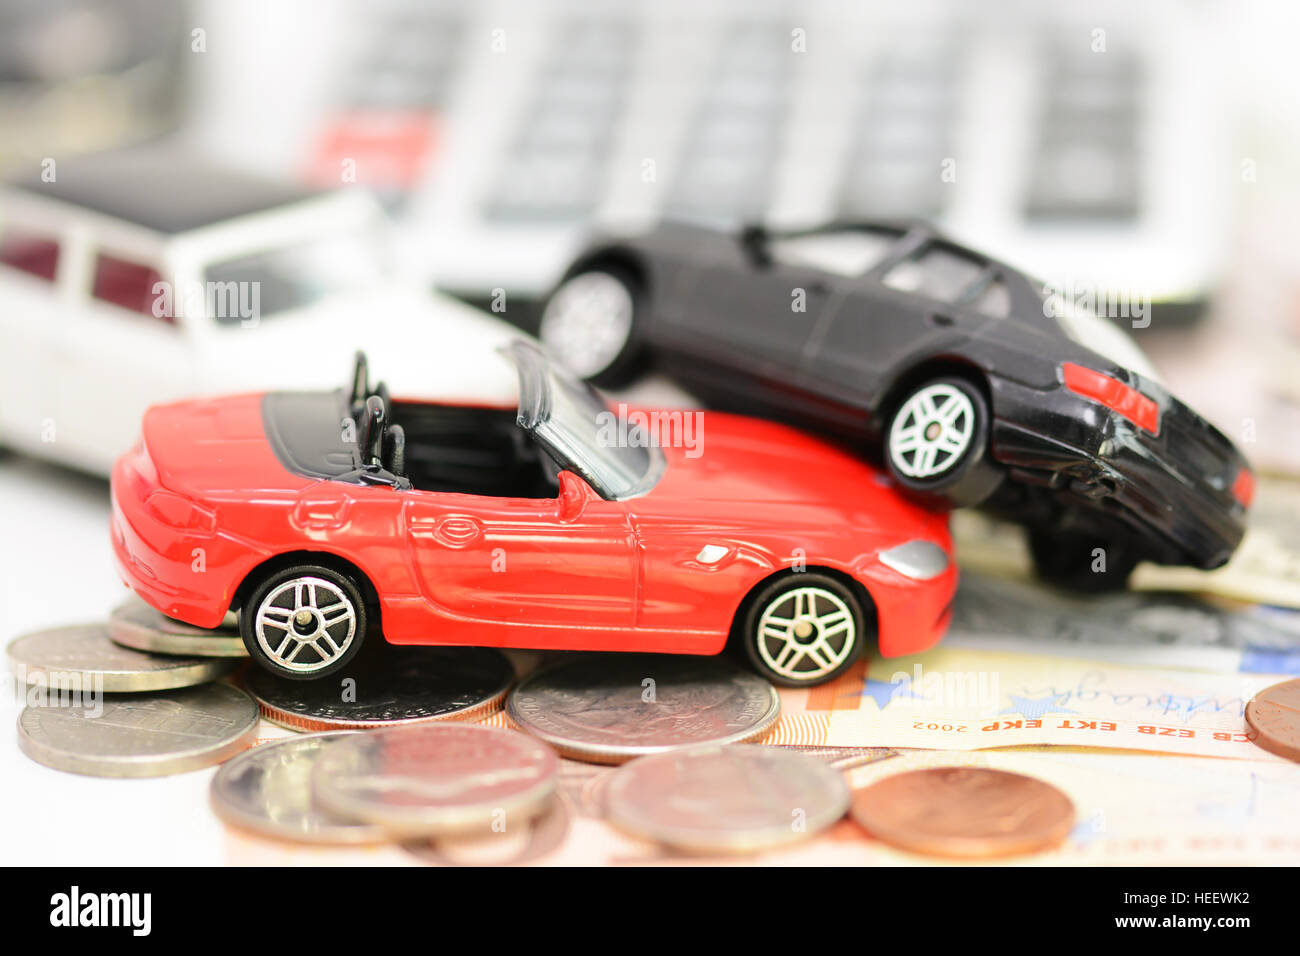 Car insurance concept with colorful toy cars, car key, coins and bills Stock Photo